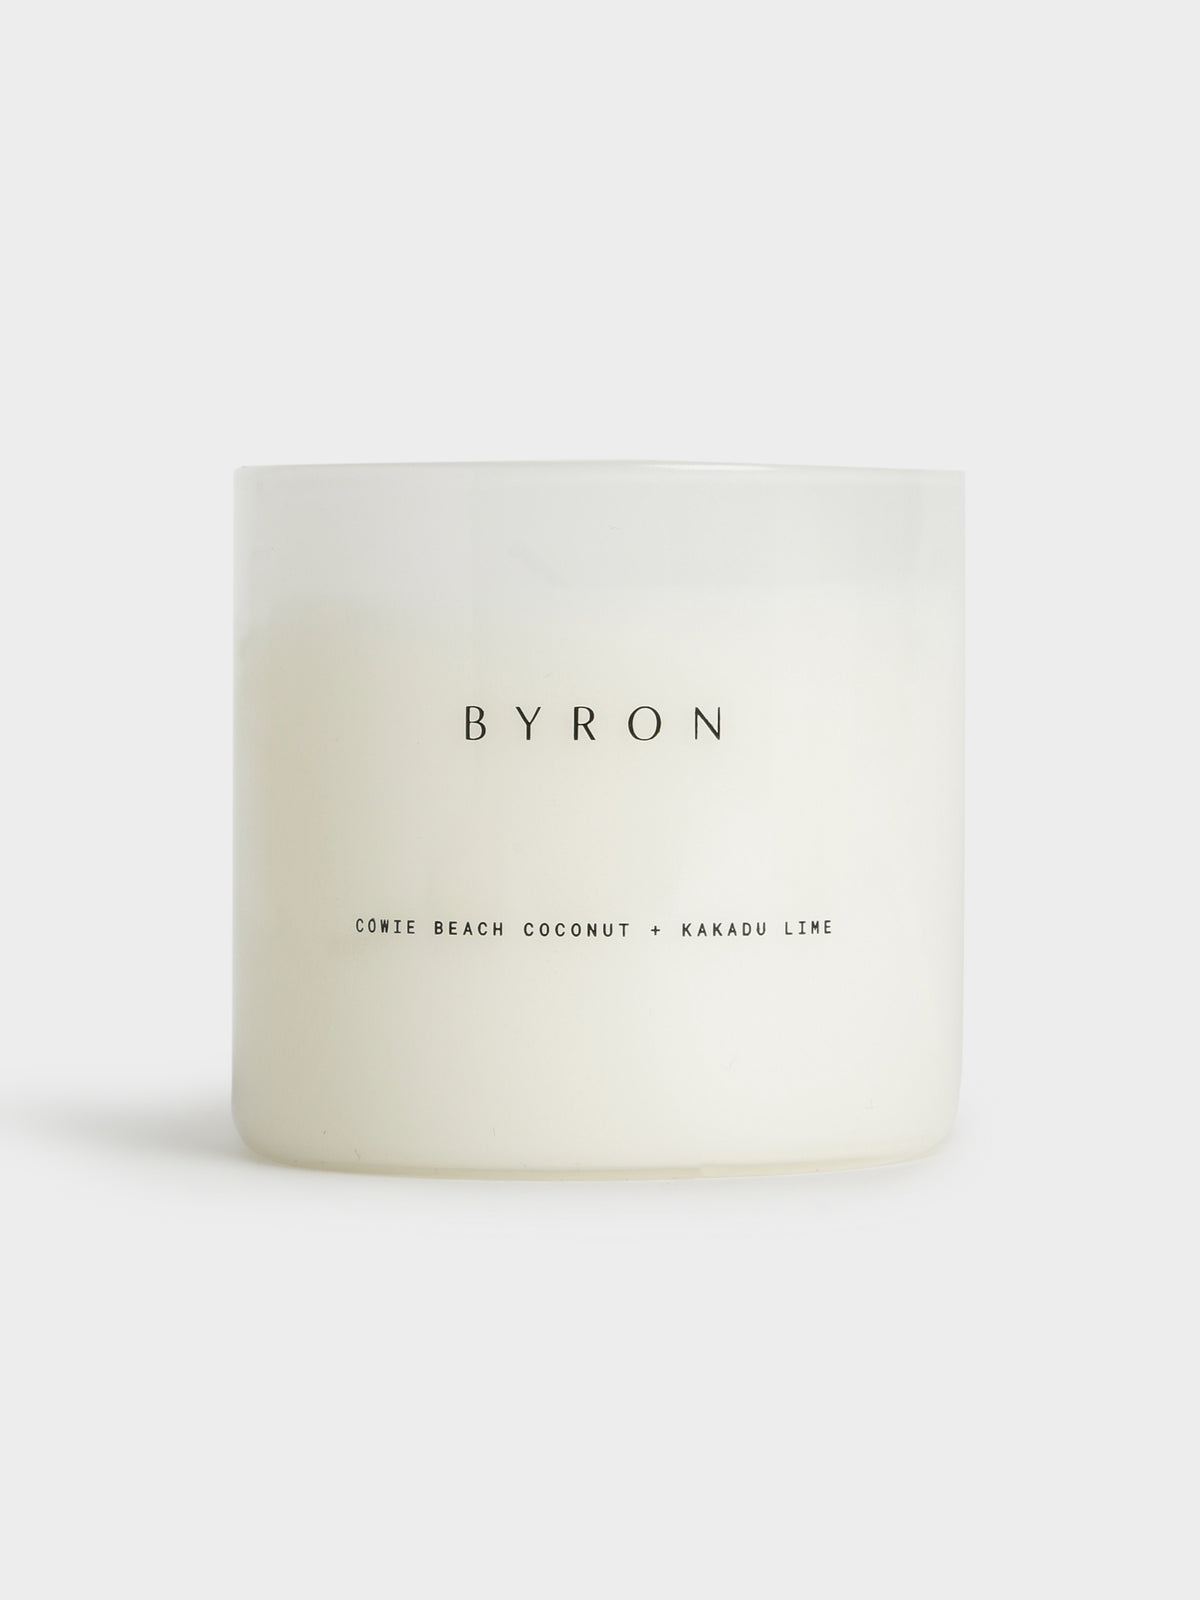 Small Scented Candle in Byron